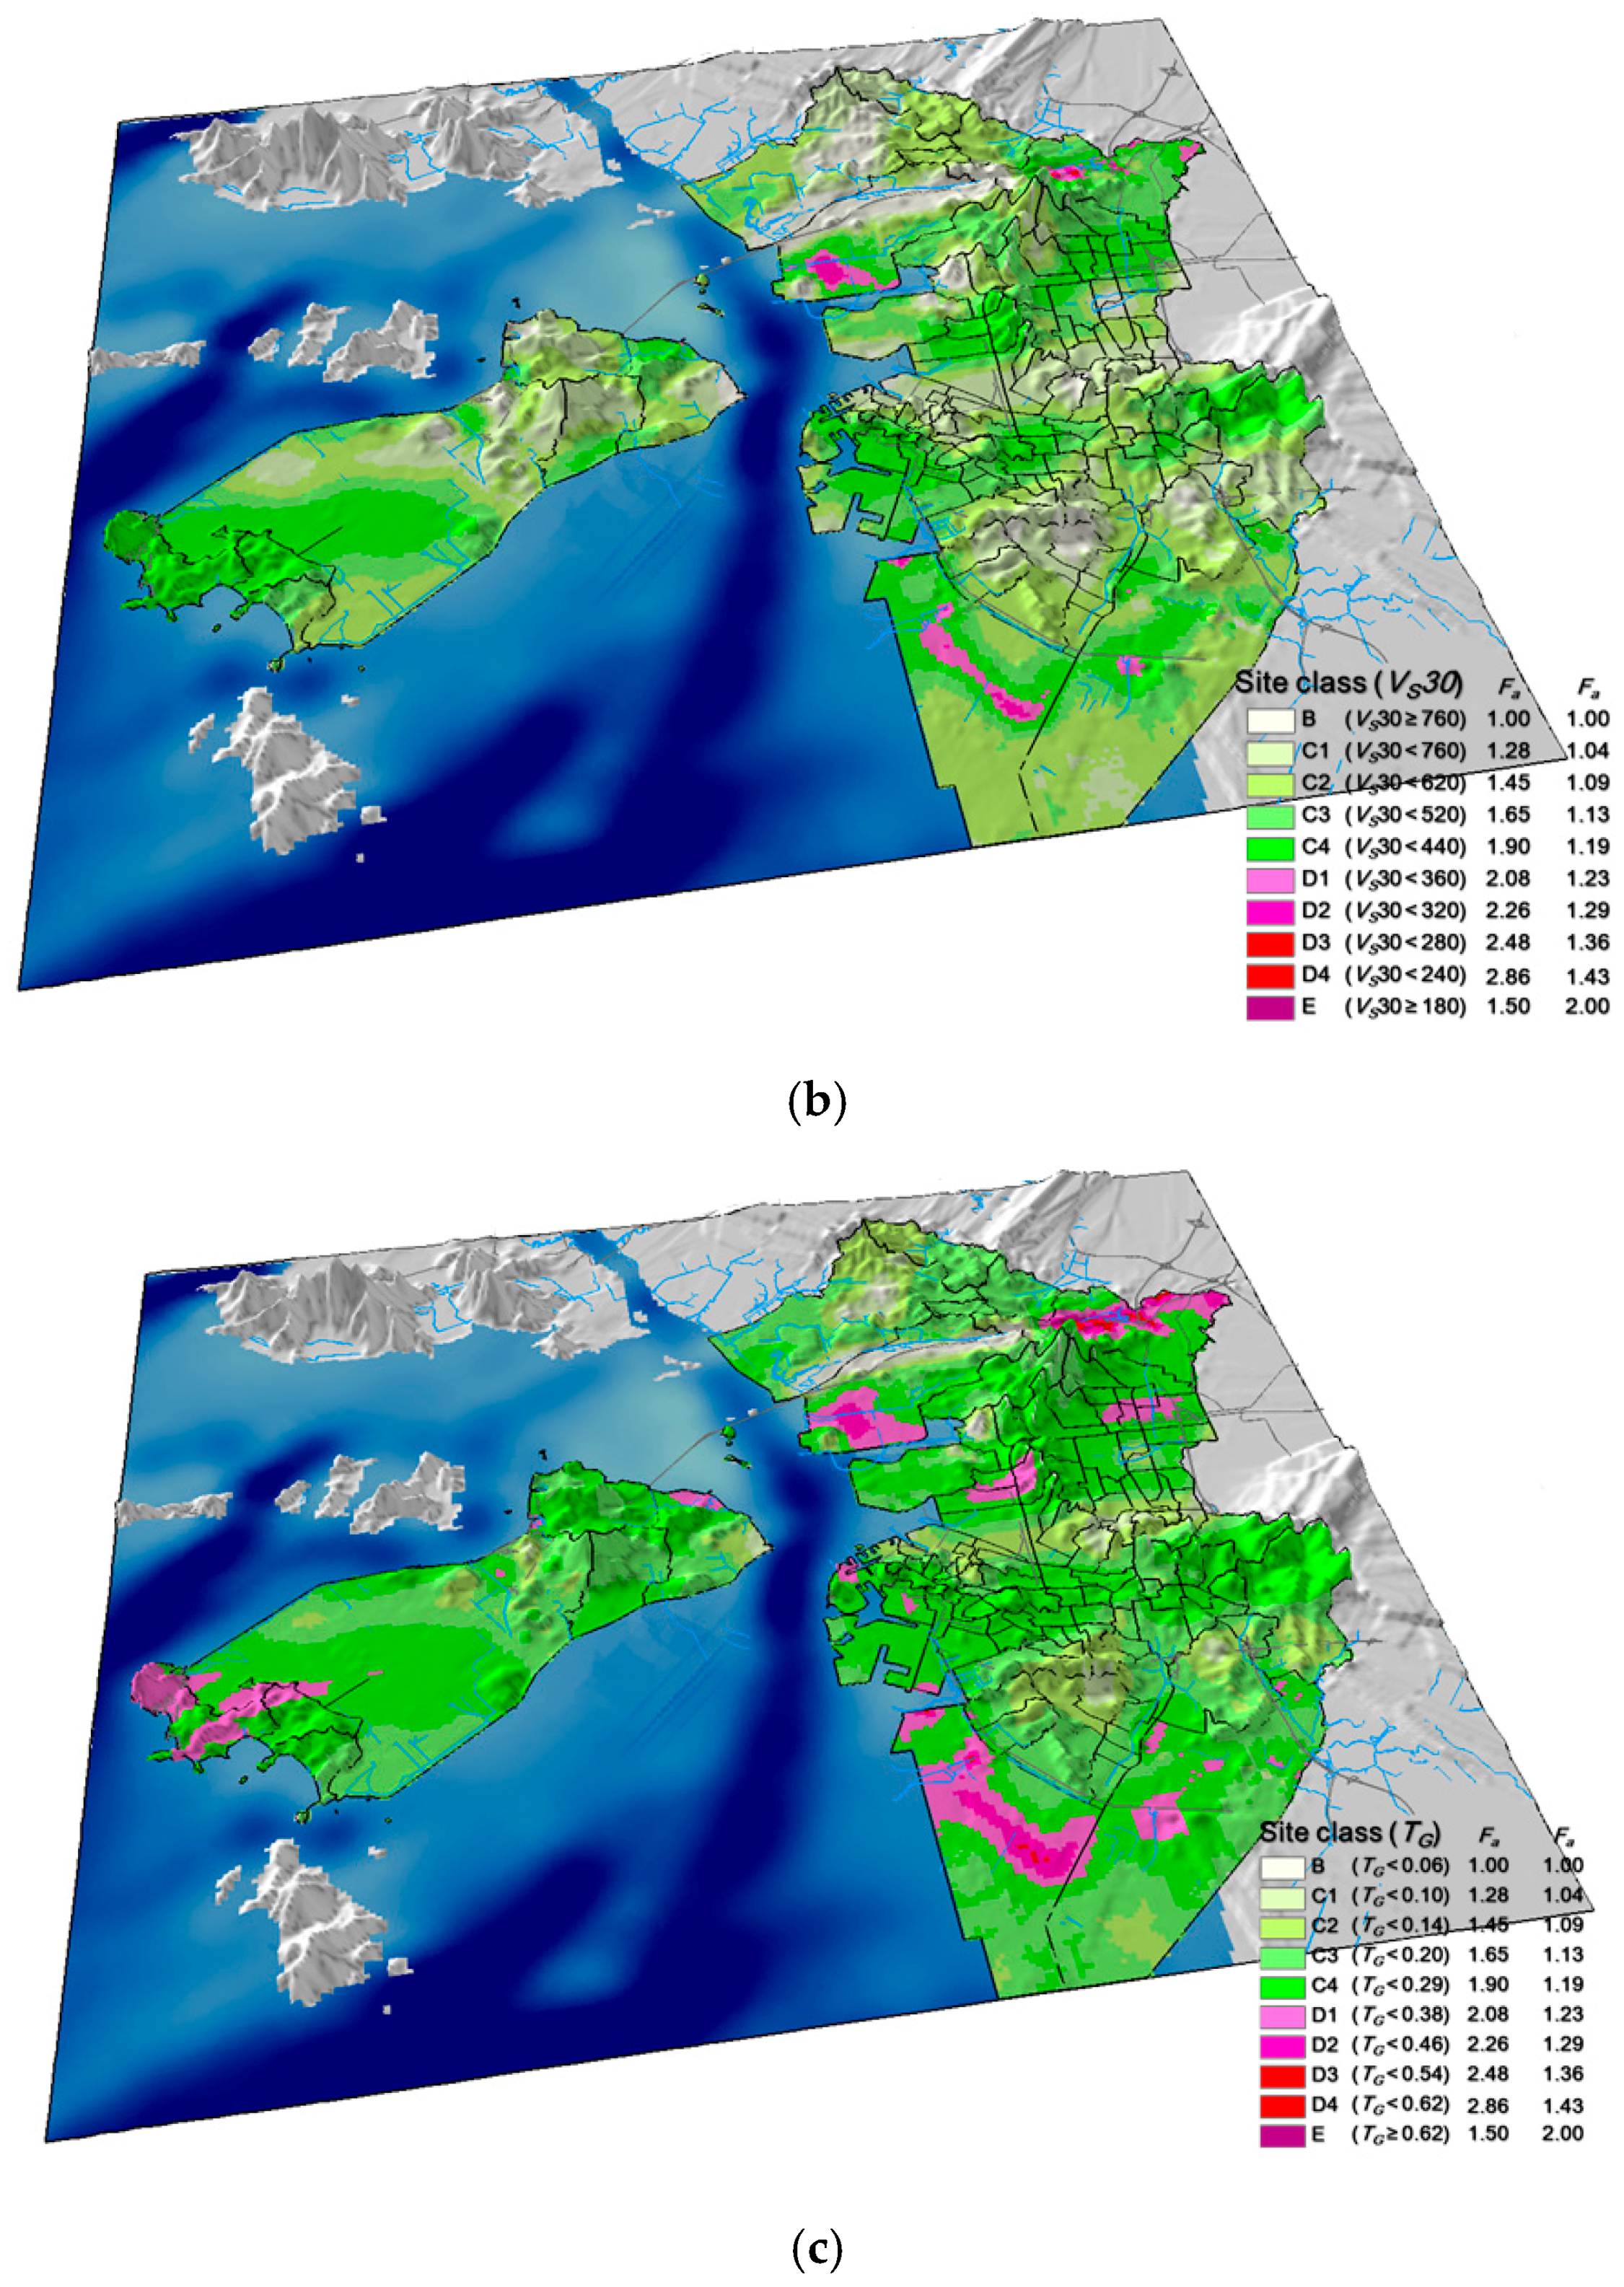 Applied Sciences Free Full Text Geo Proxy Based Site Classification For Regional Zonation Of Seismic Site Effects In South Korea Html